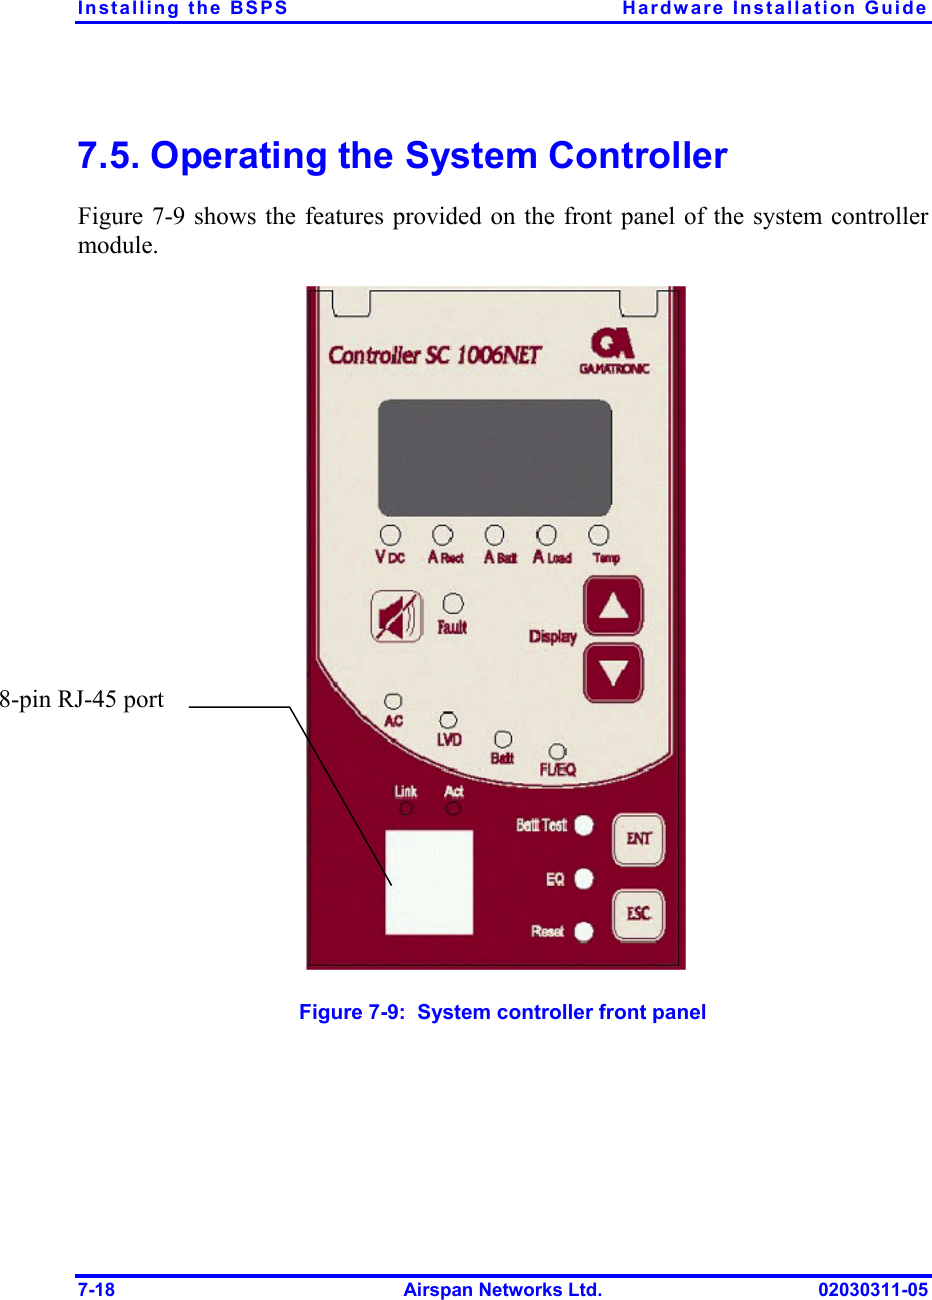 Installing the BSPS  Hardware Installation Guide 7-18  Airspan Networks Ltd.  02030311-05 7.5. Operating the System Controller Figure  7-9 shows the features provided on the front panel of the system controller module.  Figure  7-9:  System controller front panel 8-pin RJ-45 port 